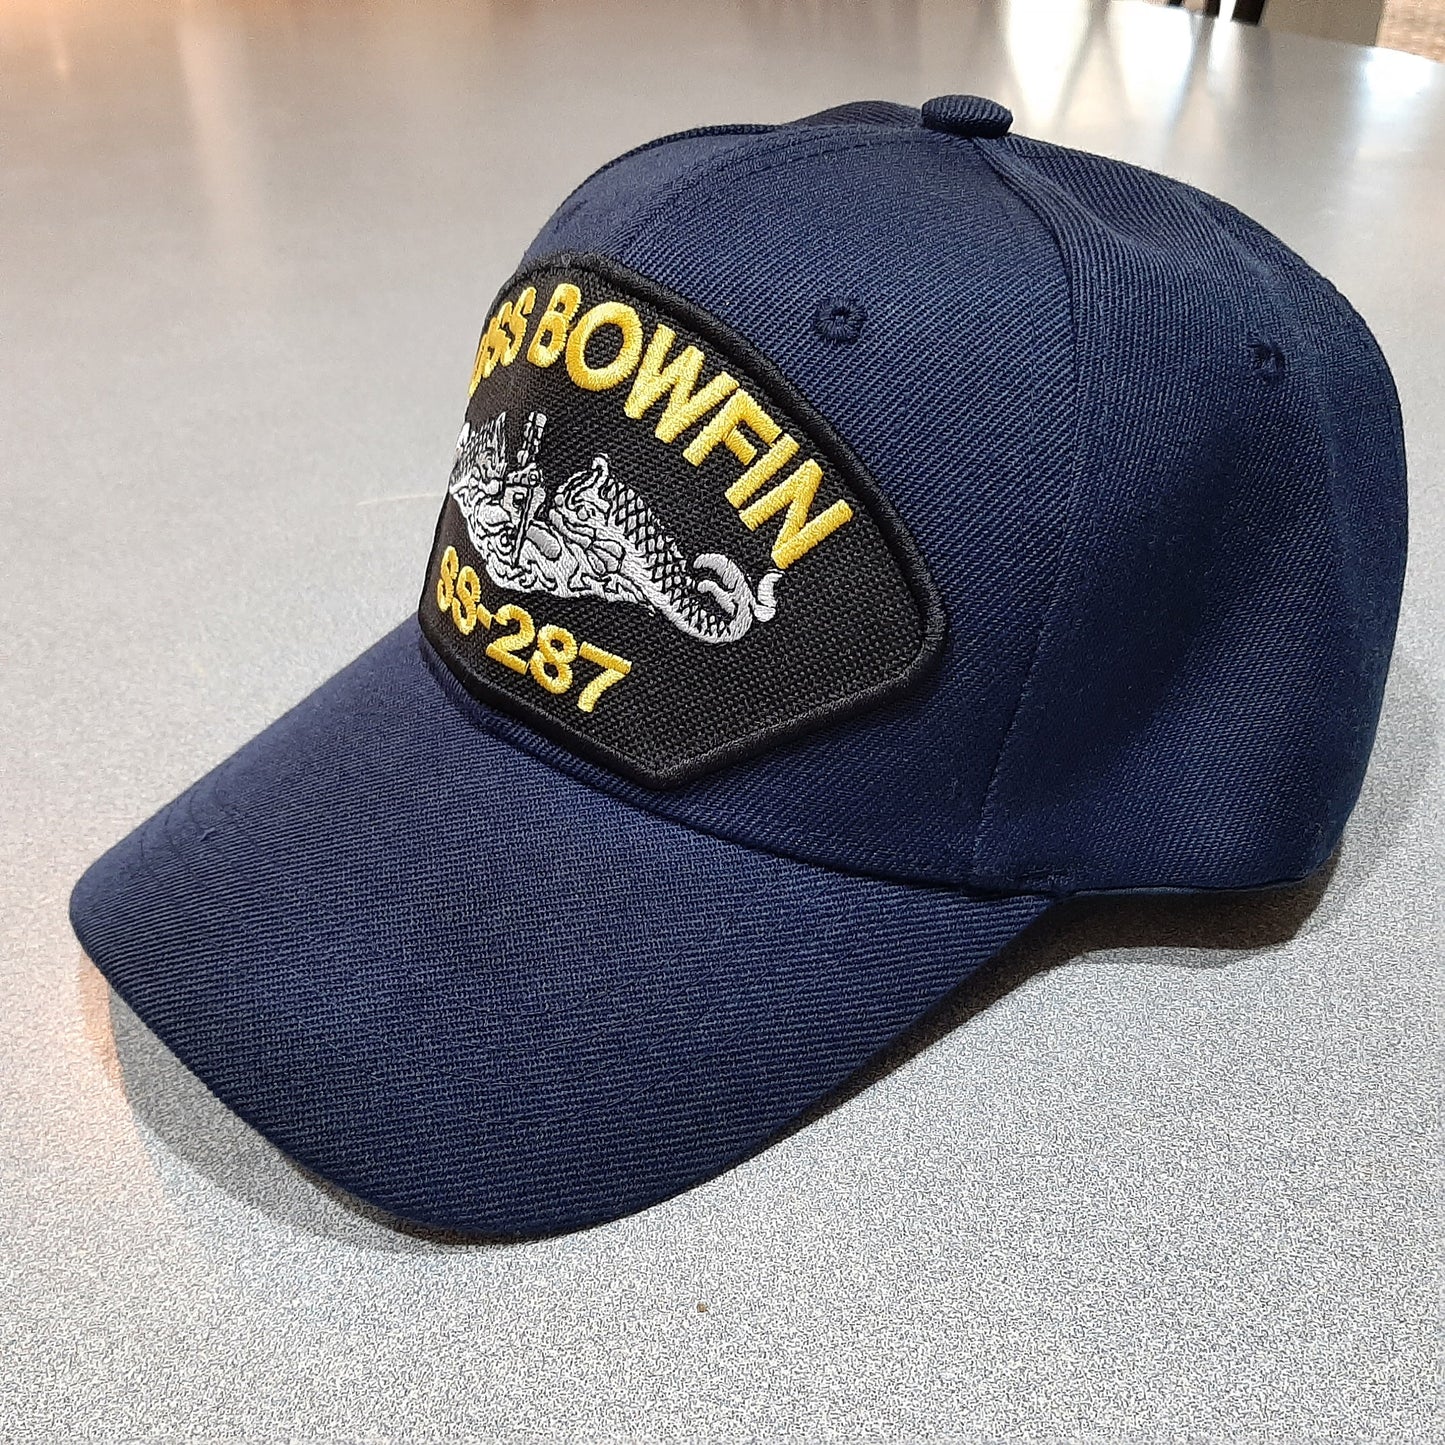 USS Bowfin SS-287 Submarine Service Boat Embroidered Patch Navy Blue Cap Hat Adjustable Strap